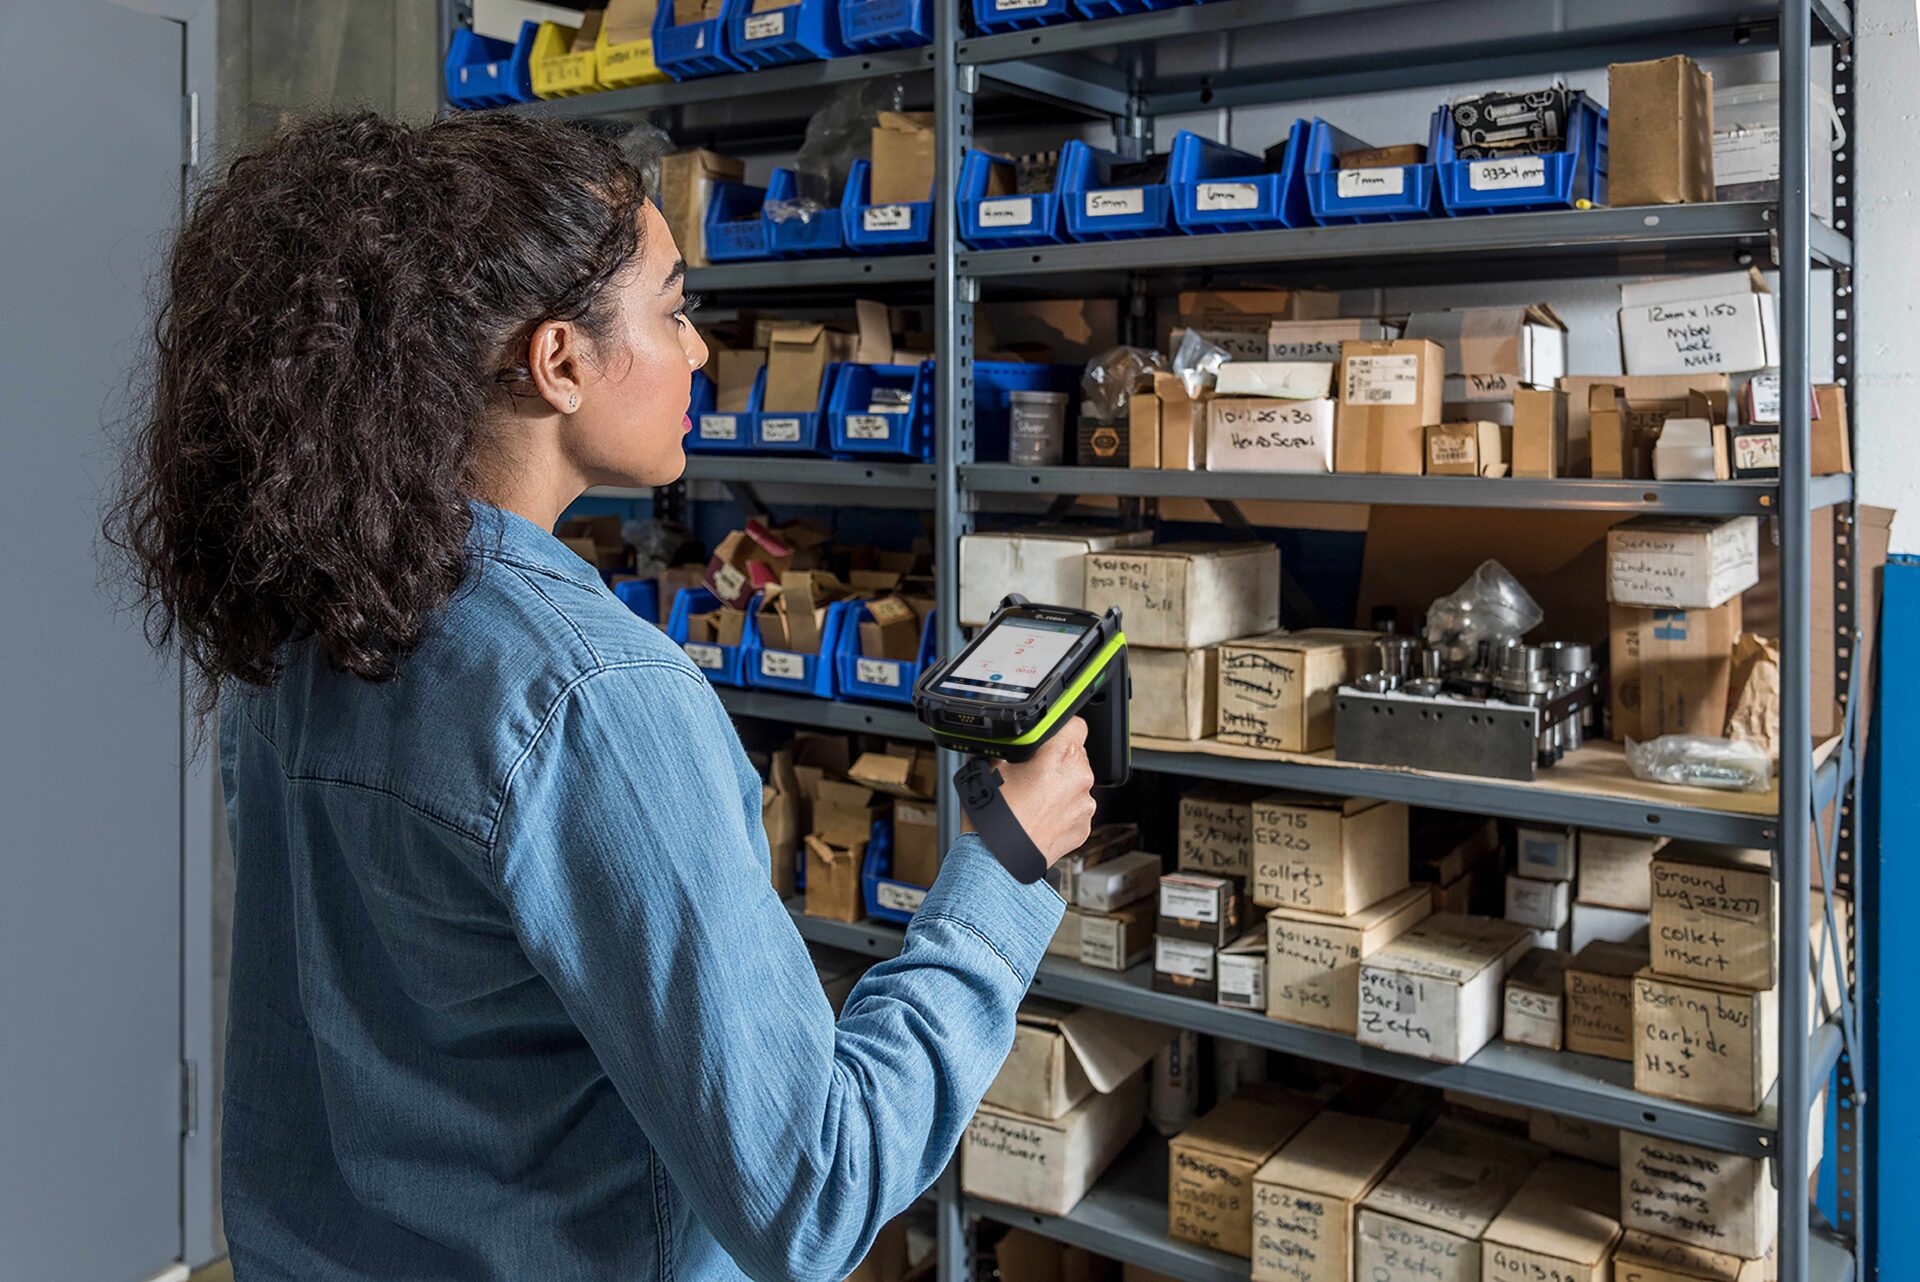 woman scanning multiple shelves of products with a handheld scanner